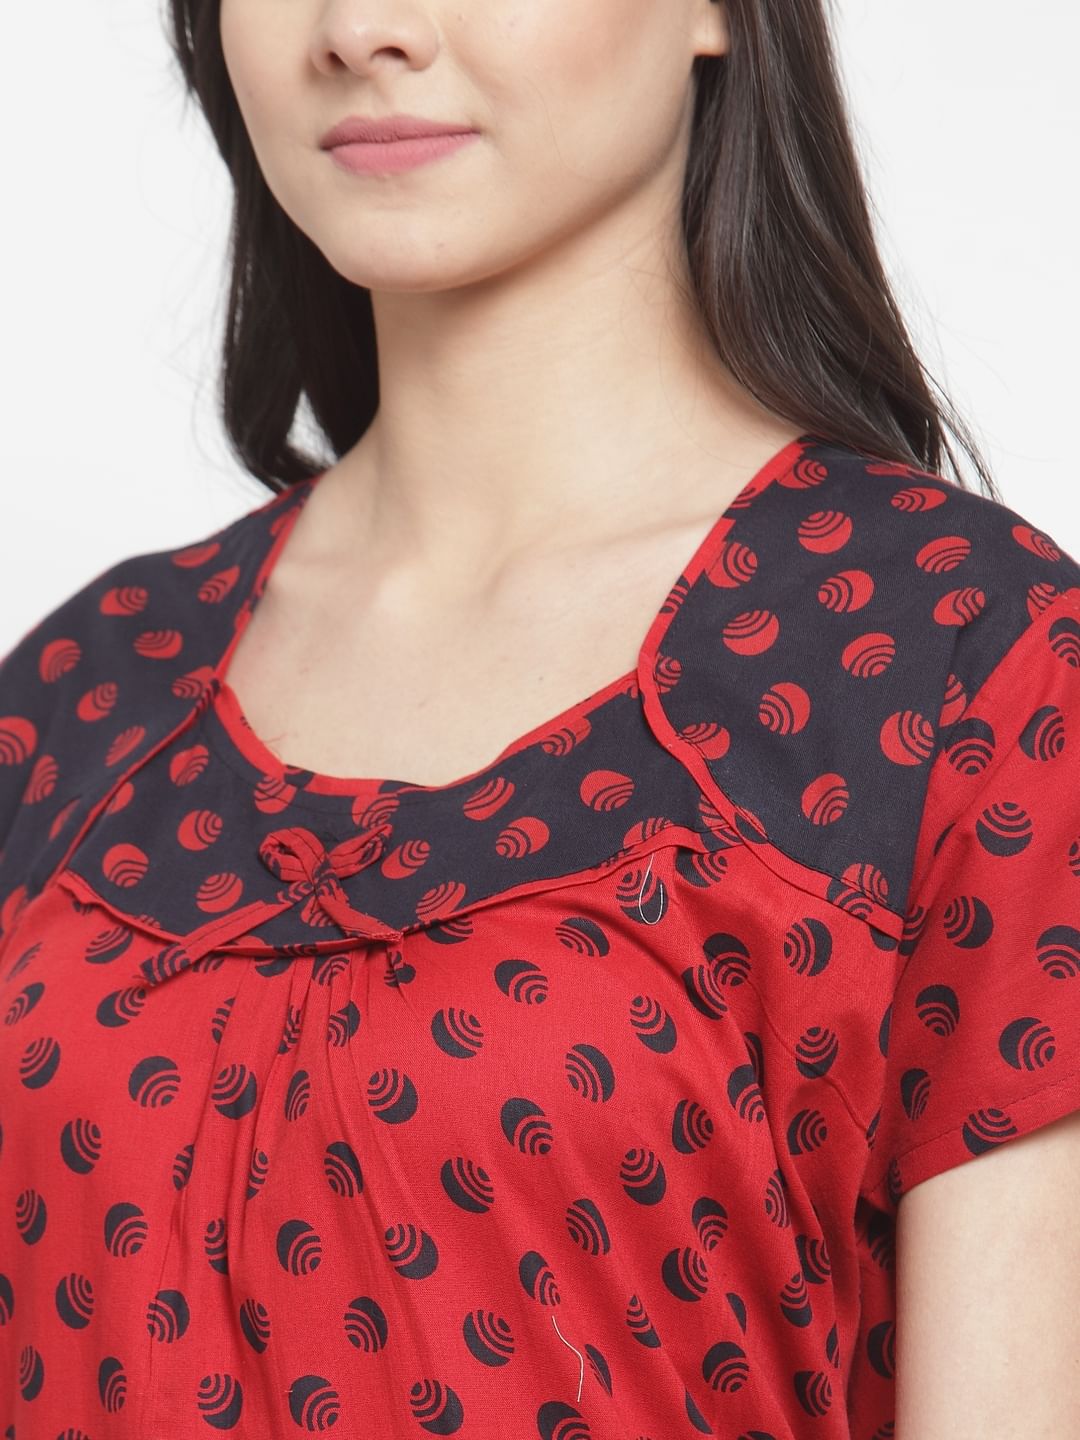 Red Cotton Printed Nighty (Free Size)